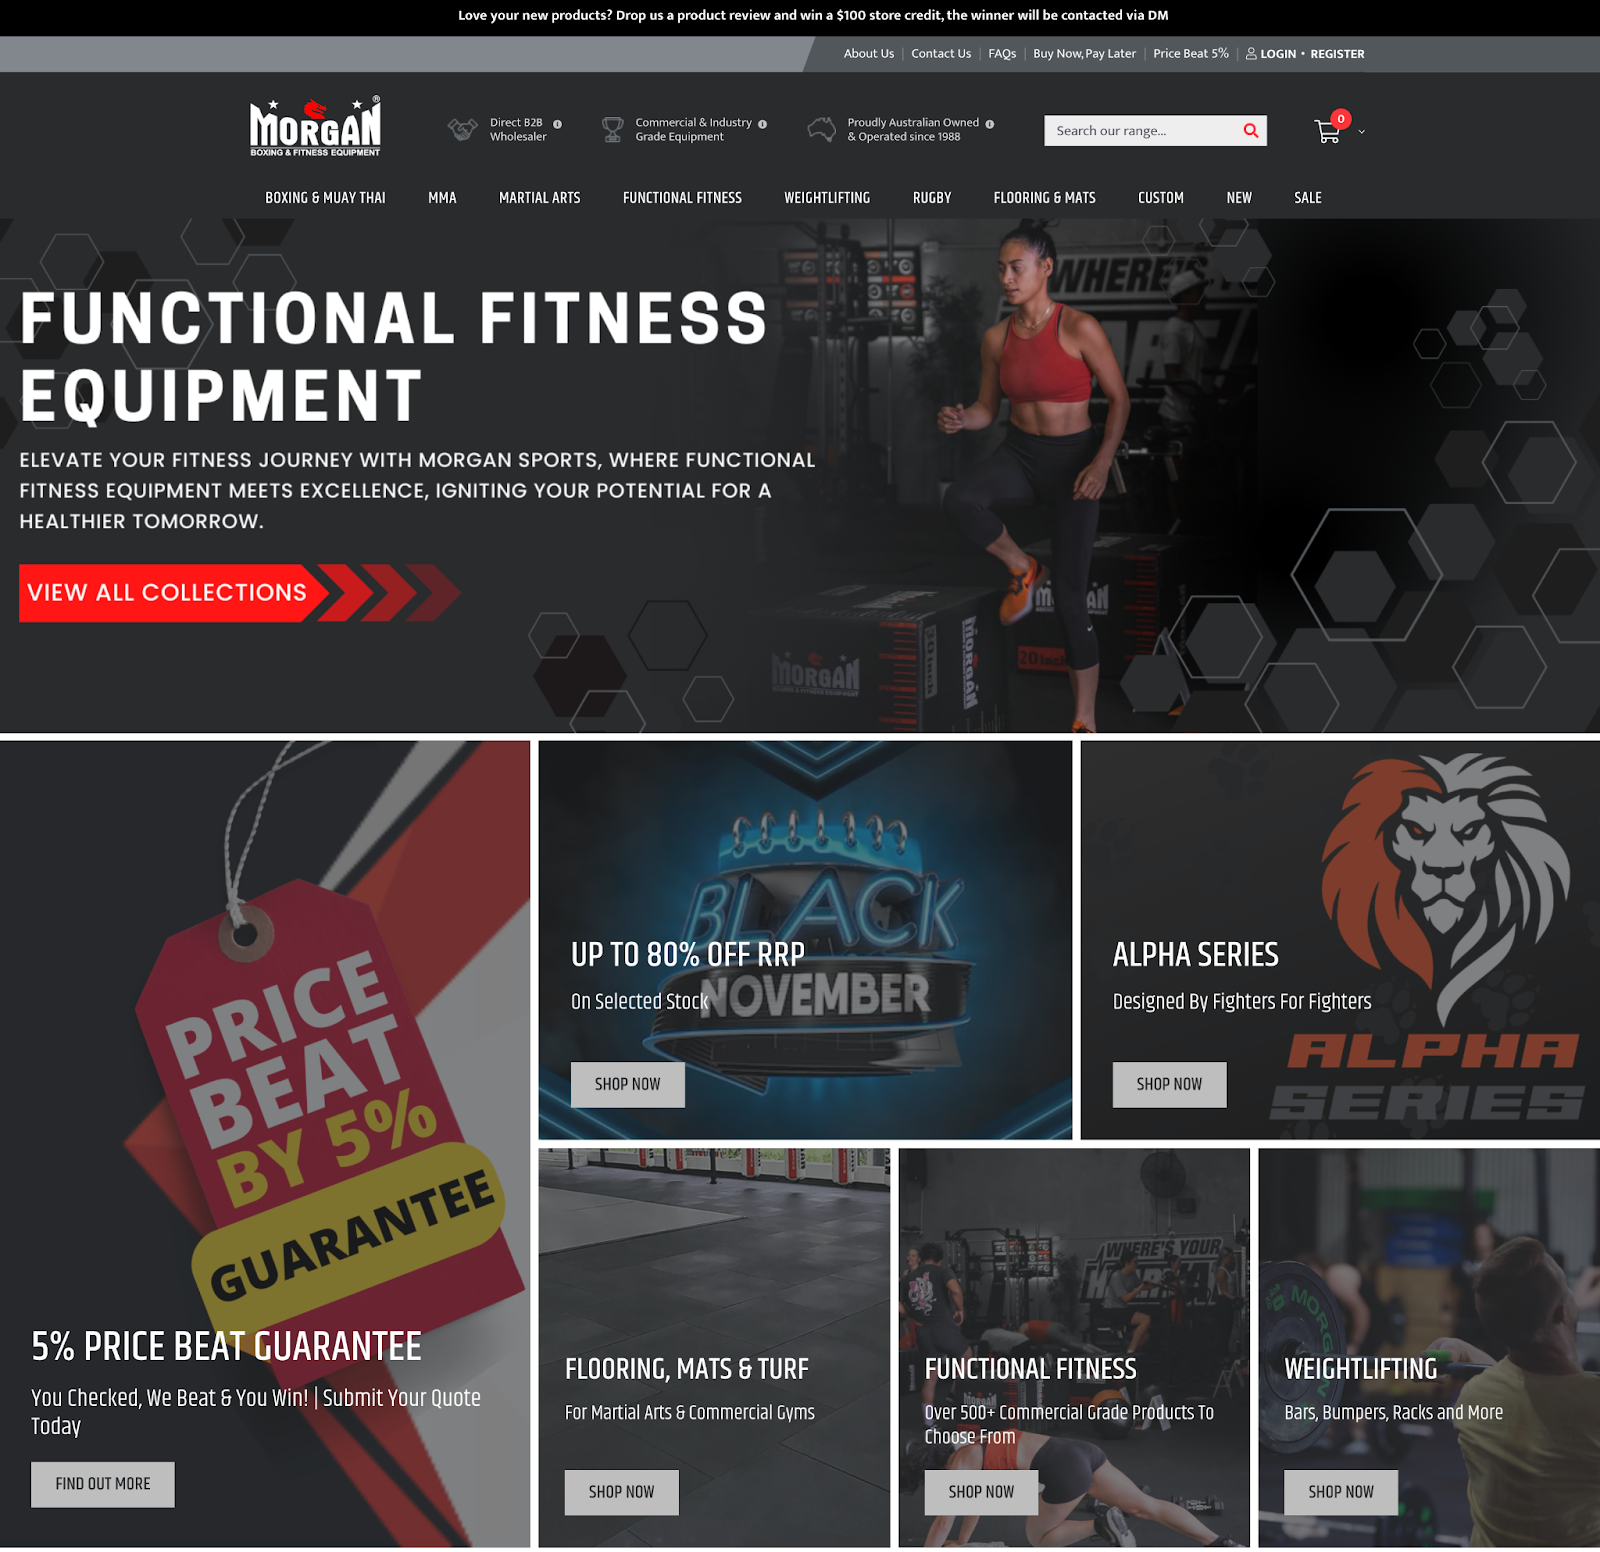 The Morgan Sports homepage with a black and red color palette and product categories in a grid